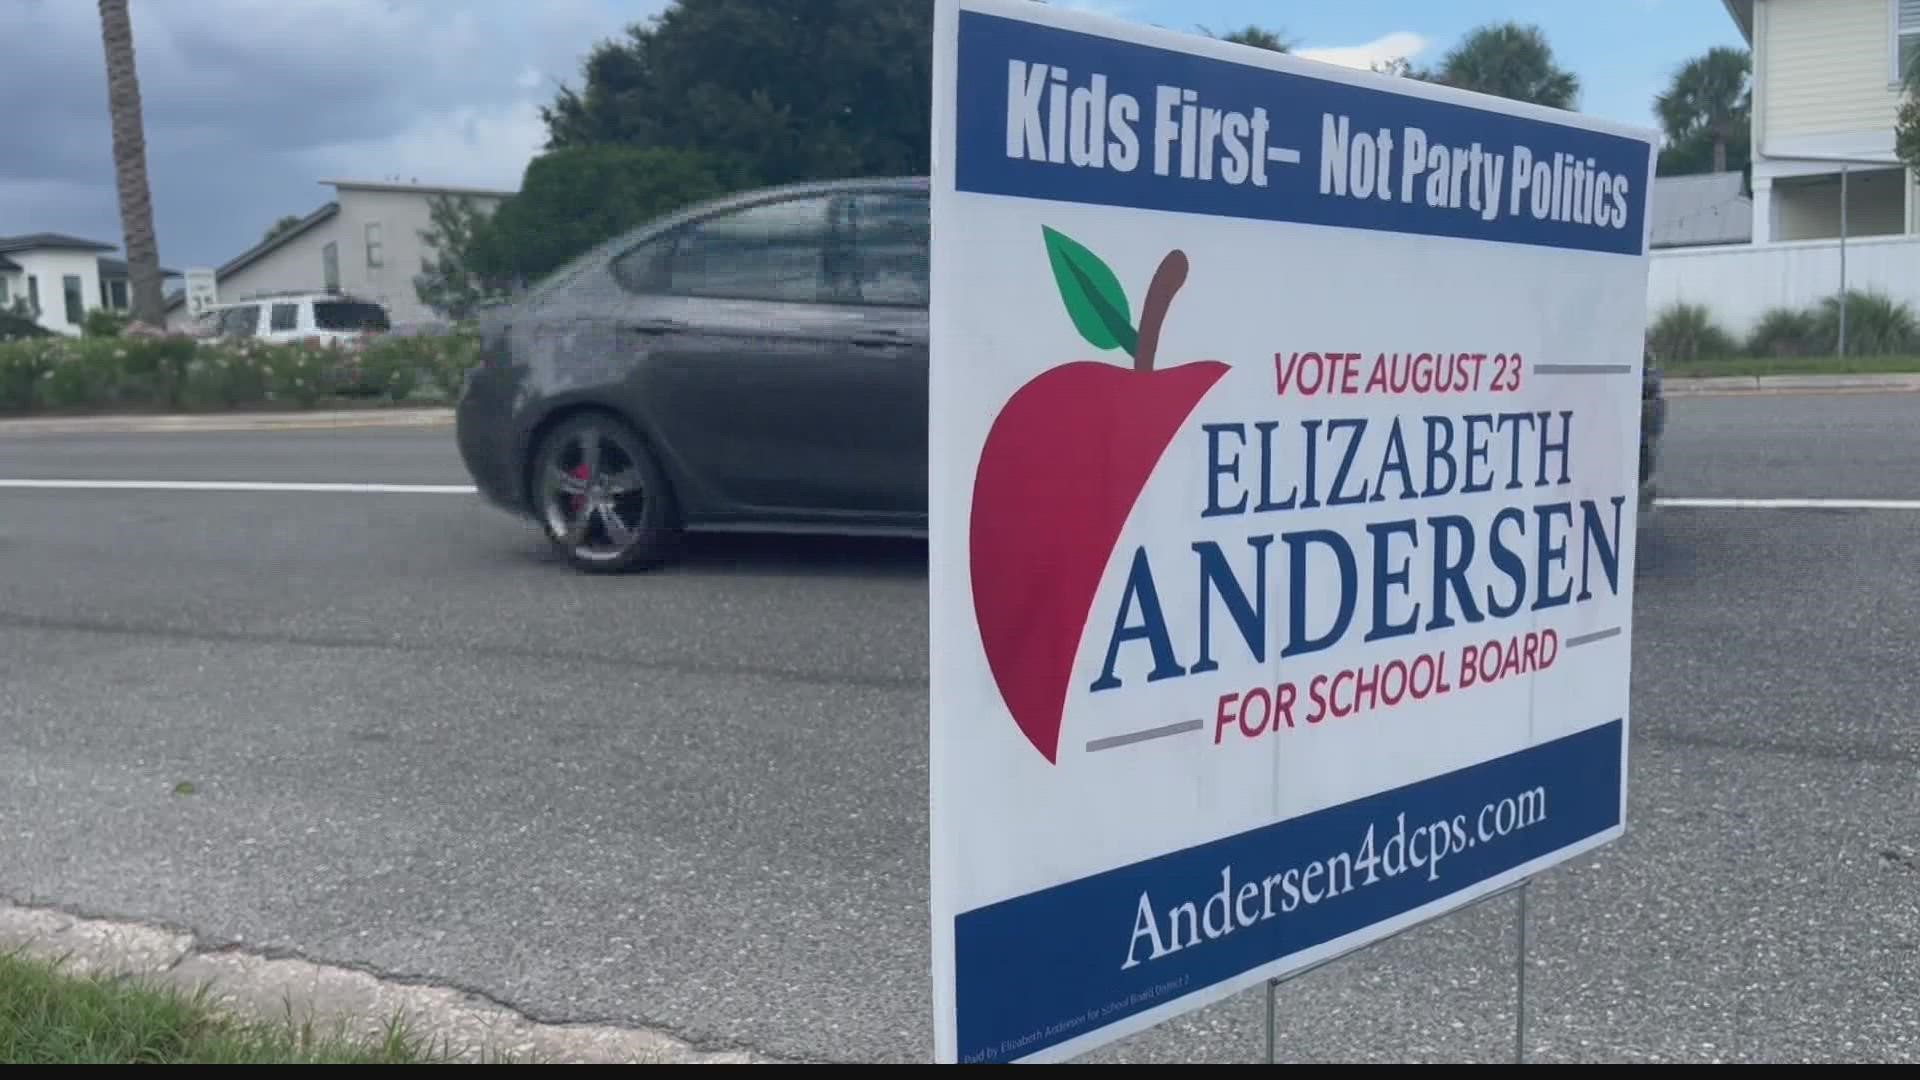 Republicans are endorsing April Carney. The local teachers union Duval Teachers United as well as Duval County Democratic Party are endorsing Elizabeth Anderson.